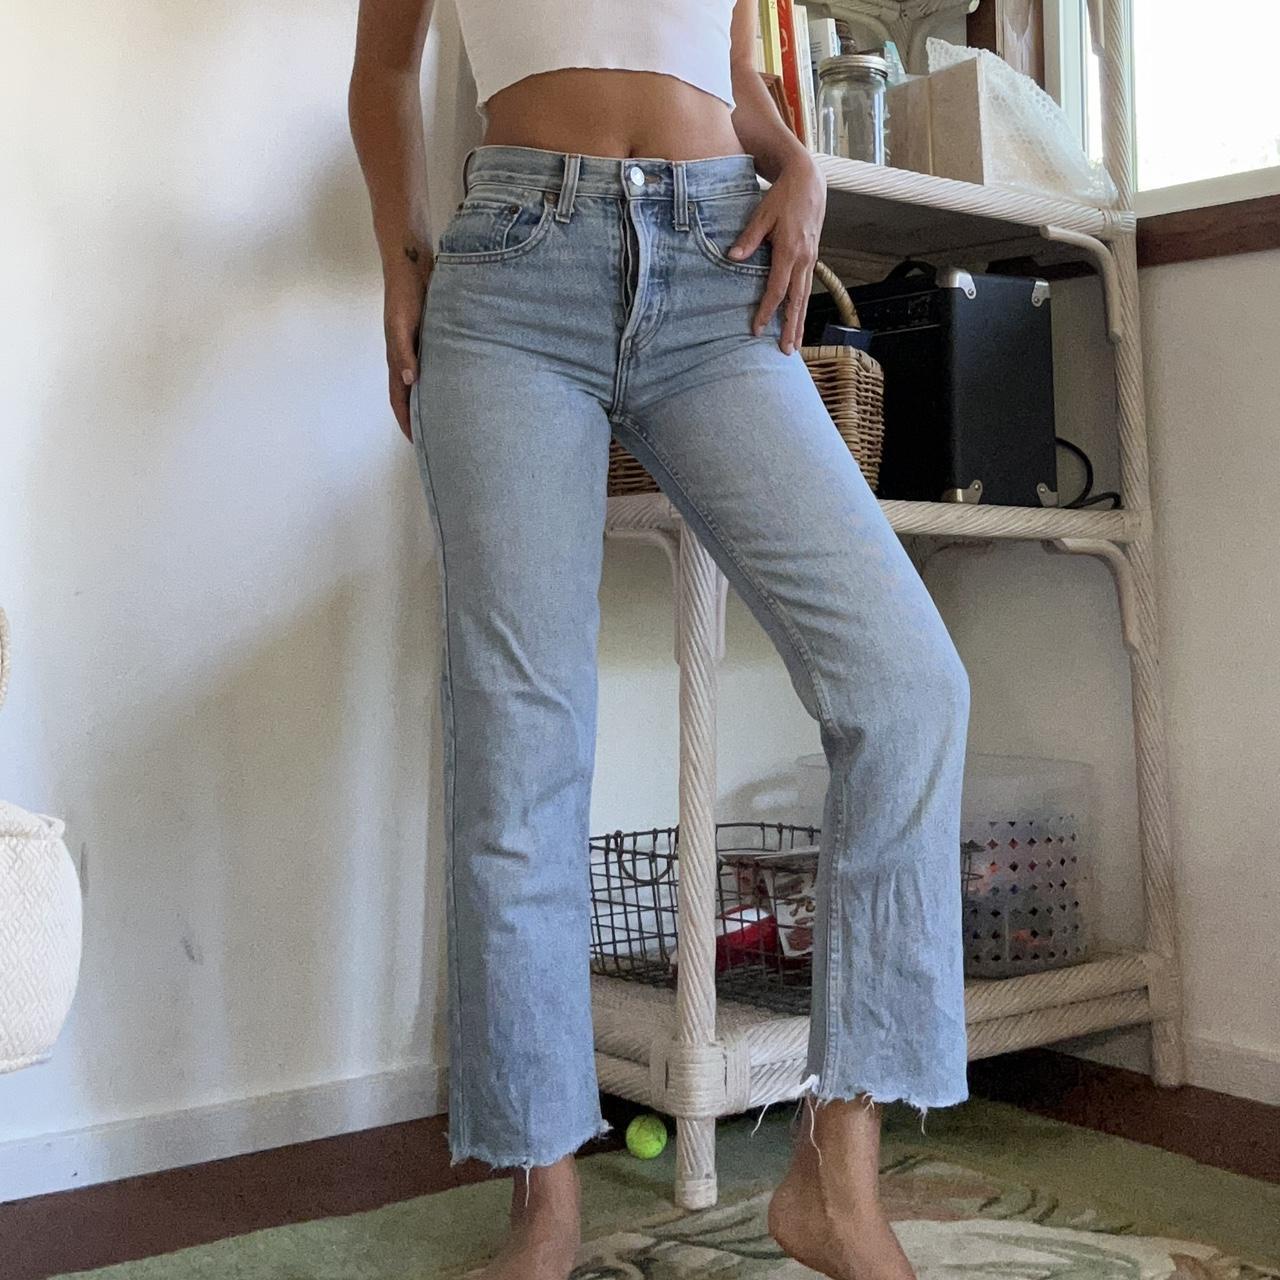 RE/DONE Women's Jeans